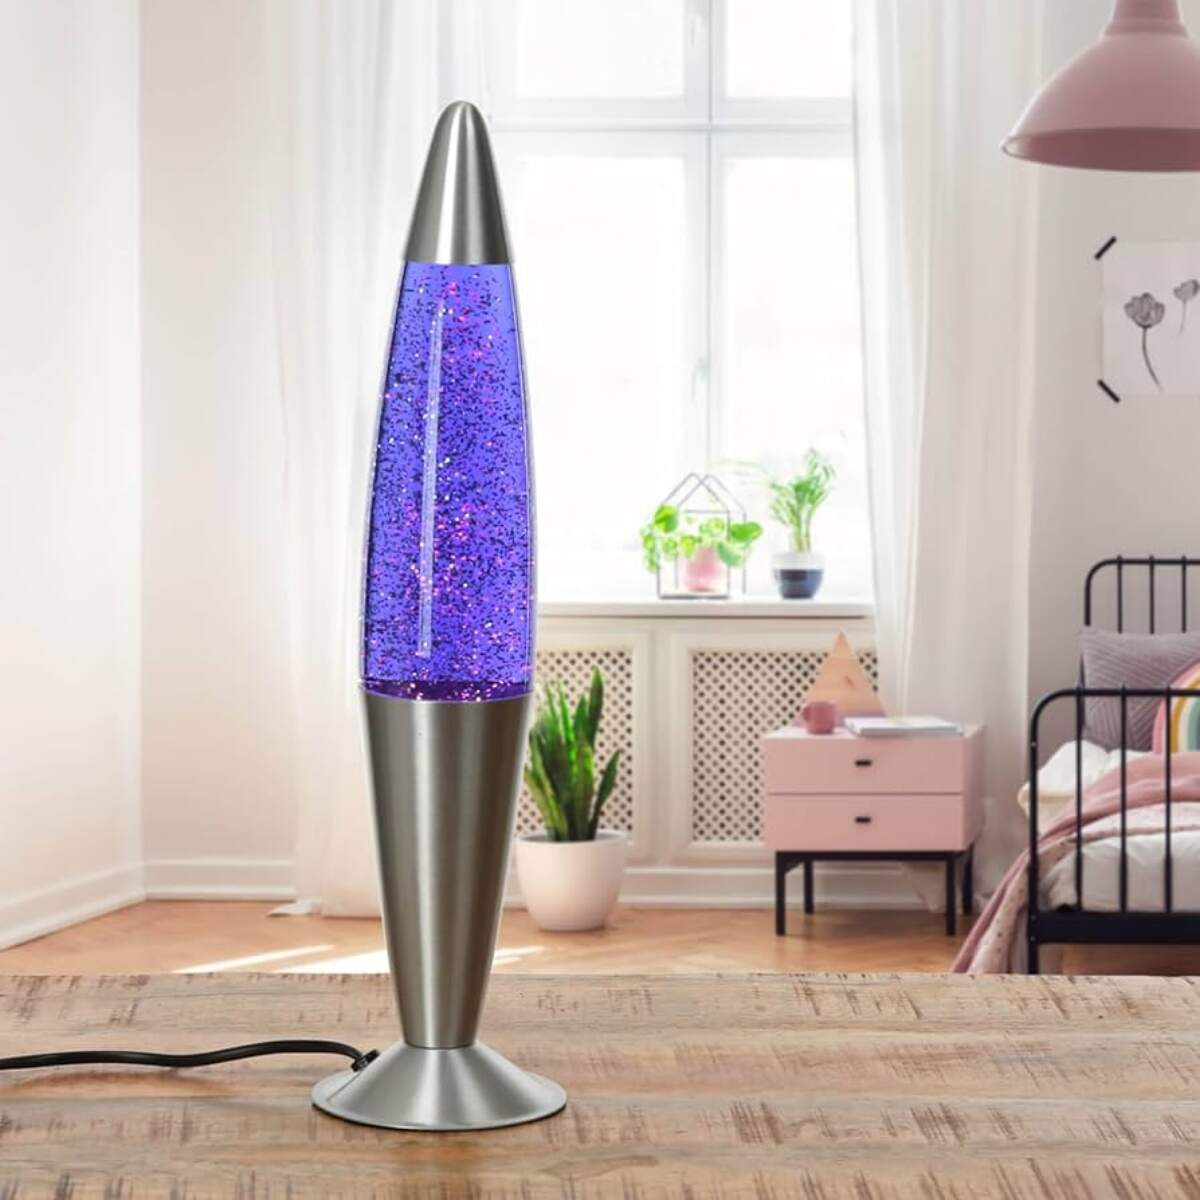 What Does A Lava Lamp Do